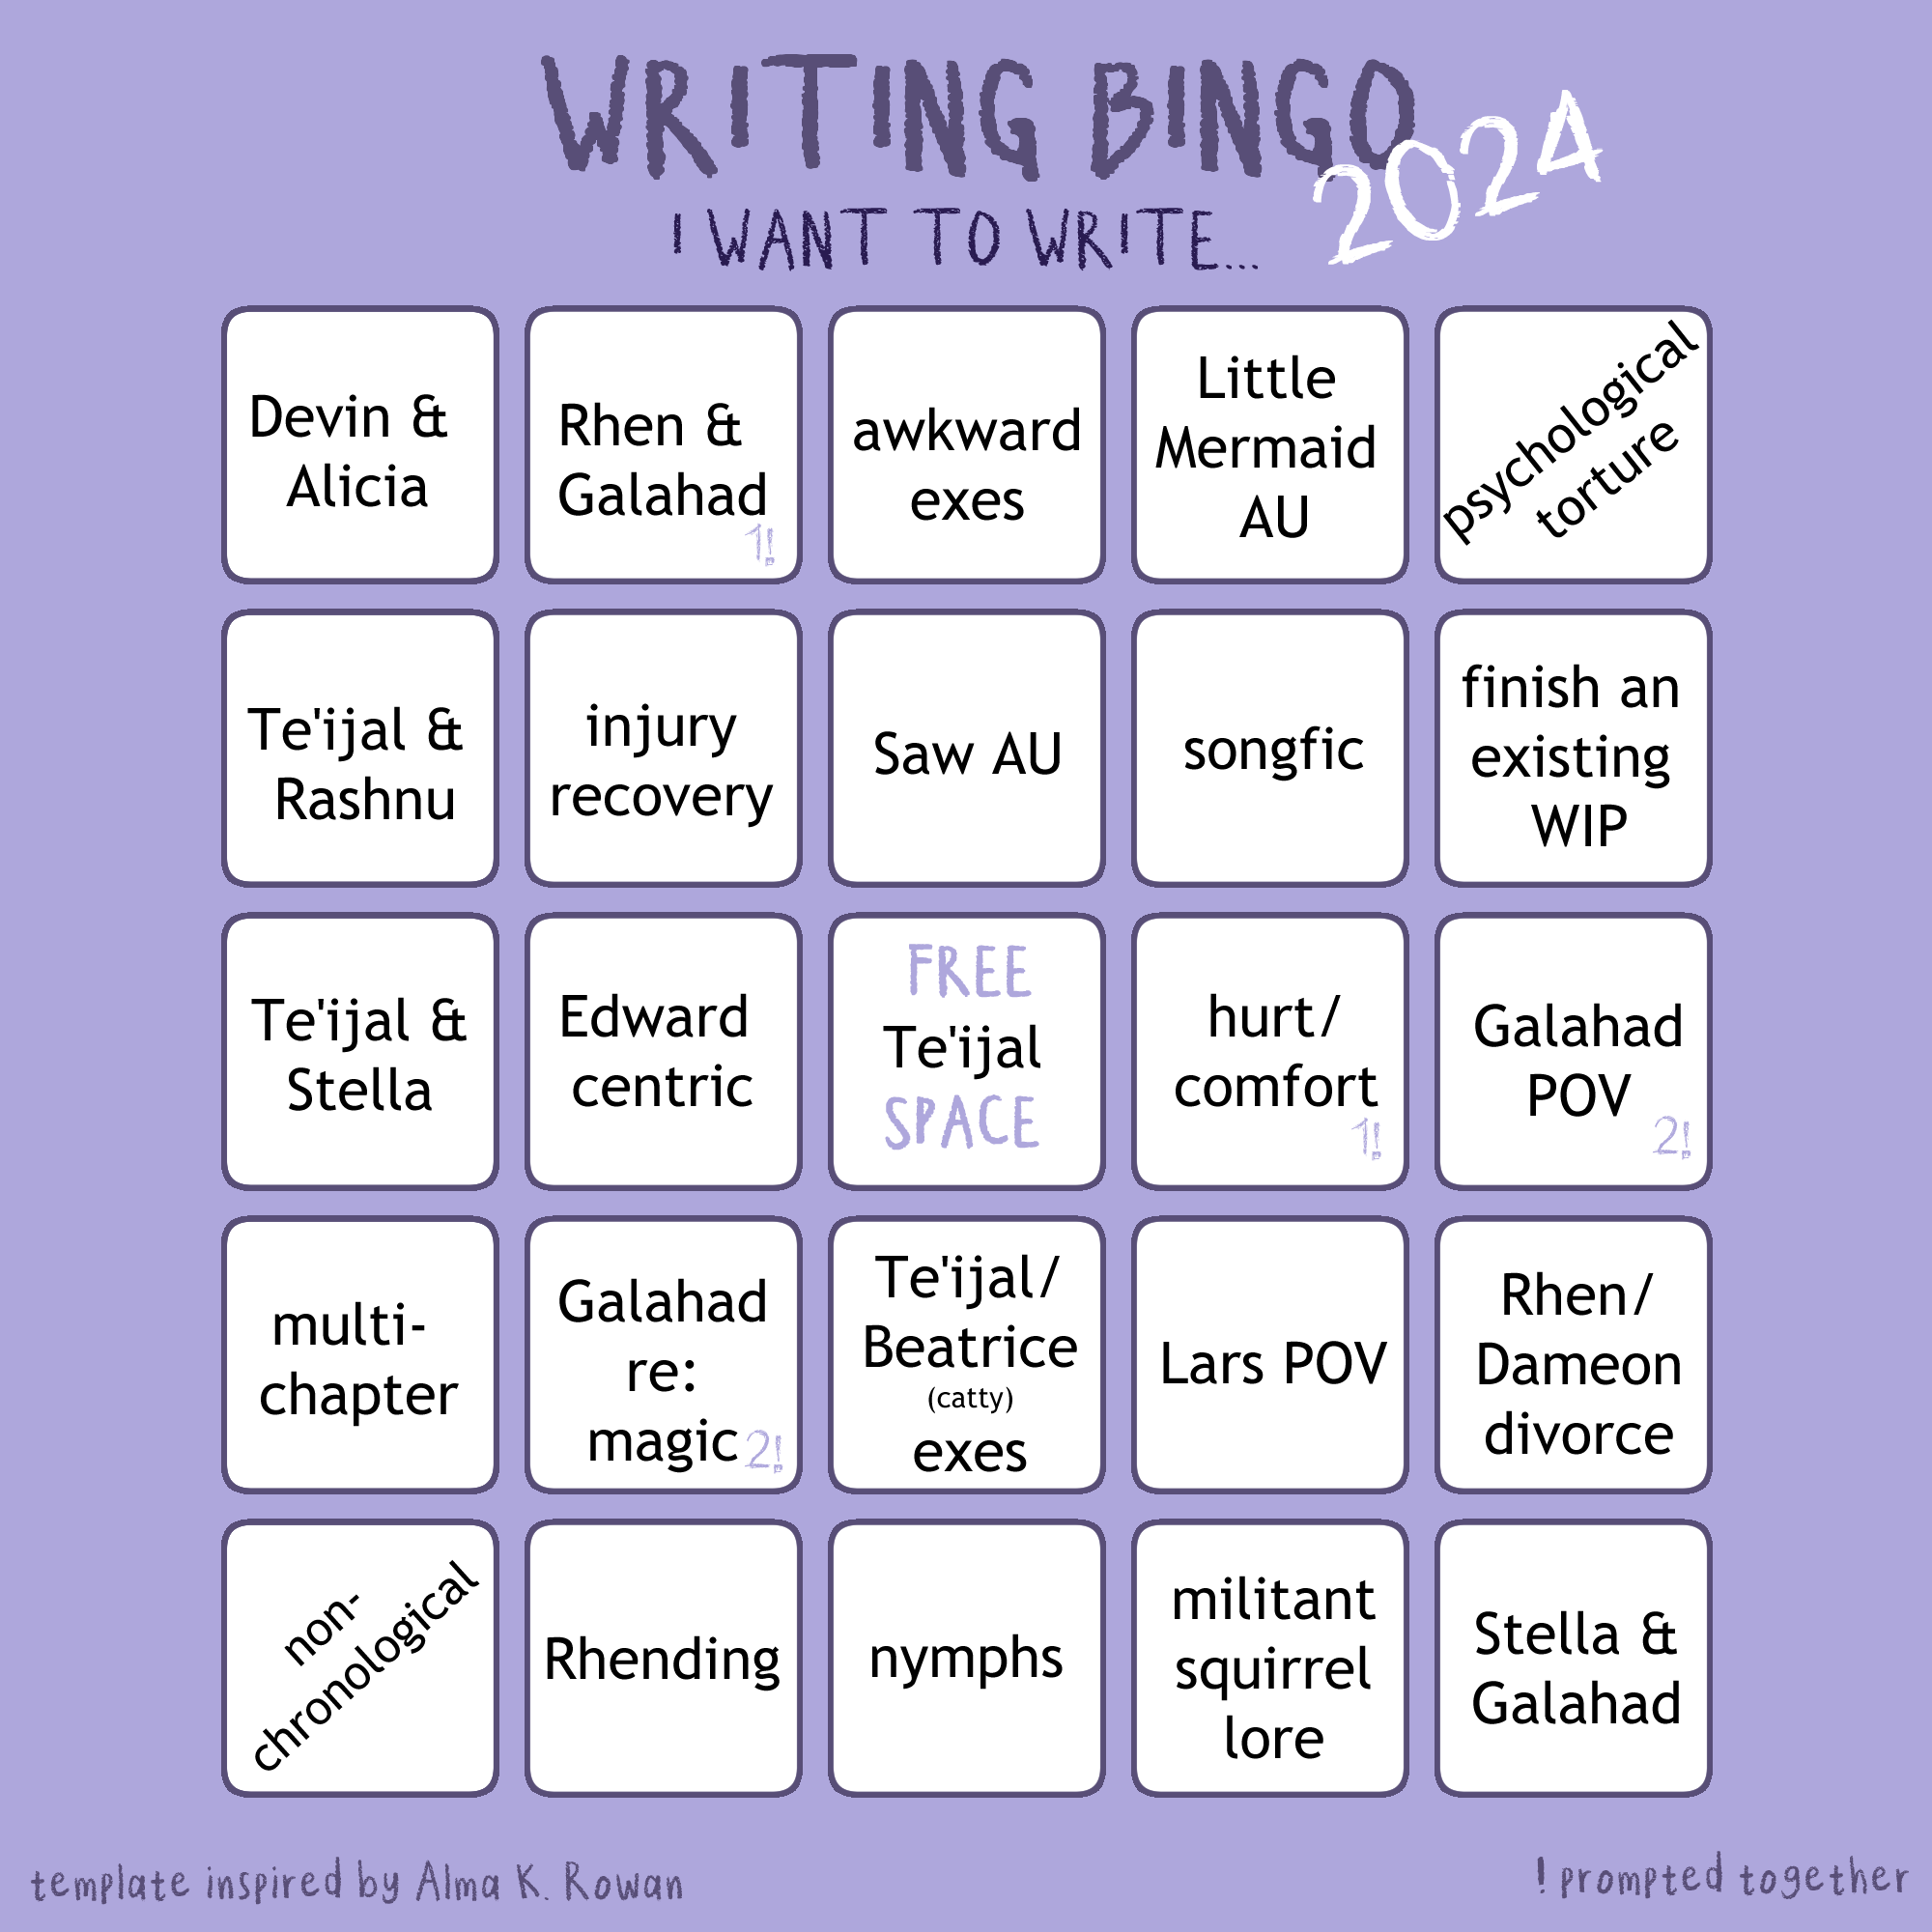 An 'I want to write' 5 by 5 bingo. The template is inspired by Alma K. Rowan. The prompts are: Devin & Alicia, Rhen & Galahad, awkward exes, Little Mermaid AU, psychological torture, Te'ijal & Rashnu, injury recovery, Saw AU, songfic, finish an existing WIP, Te'ijal & Stella, Edward centric, Free Space: Te'ijal, hurt/comfort, Galahad POV, multi-chapter, Galahad re: magic, Te'ijal/Beatrice (catty) exes, Lars POV, Rhen/Dameon divorce, non-chronological, Rhending, nymphs, militant squirrel lore, Stella & Galahad. A note in the corner marks that Rhen & Galahad and hurt/comfort were prompted together, as were Galahad POV and Galahad re: magic.